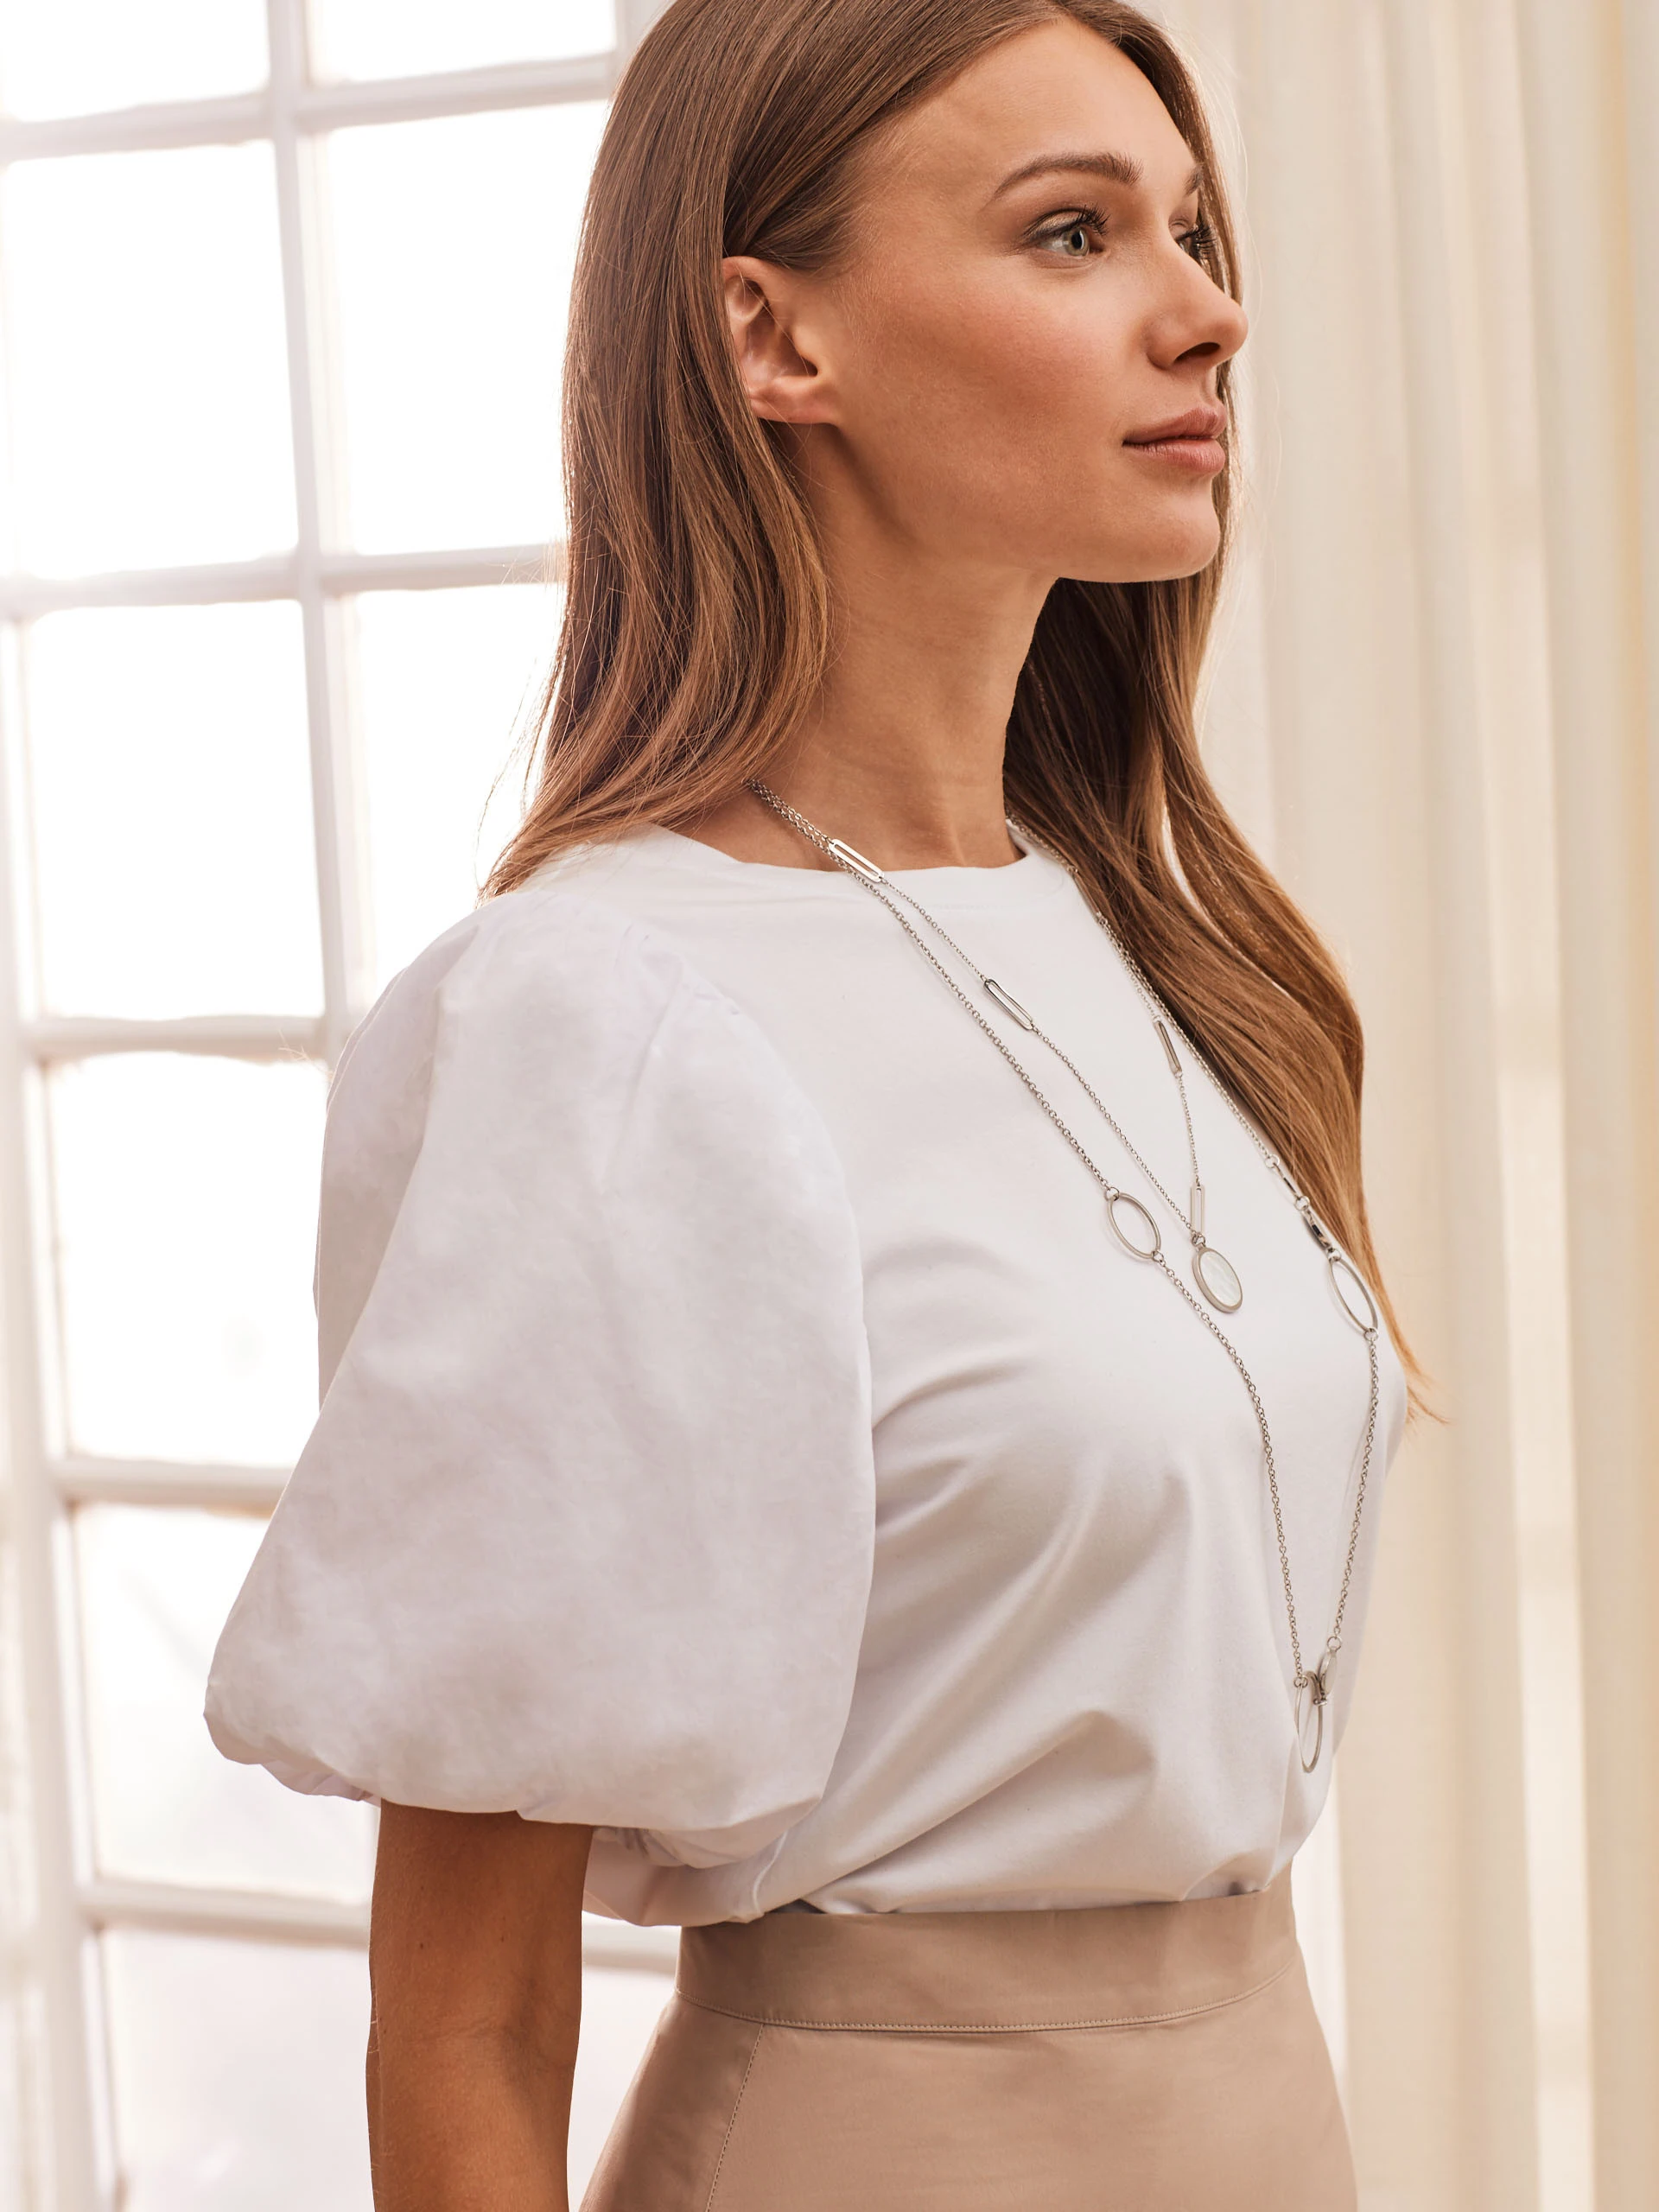 WHITE BLOUSE WITH BUFF SLEEVES